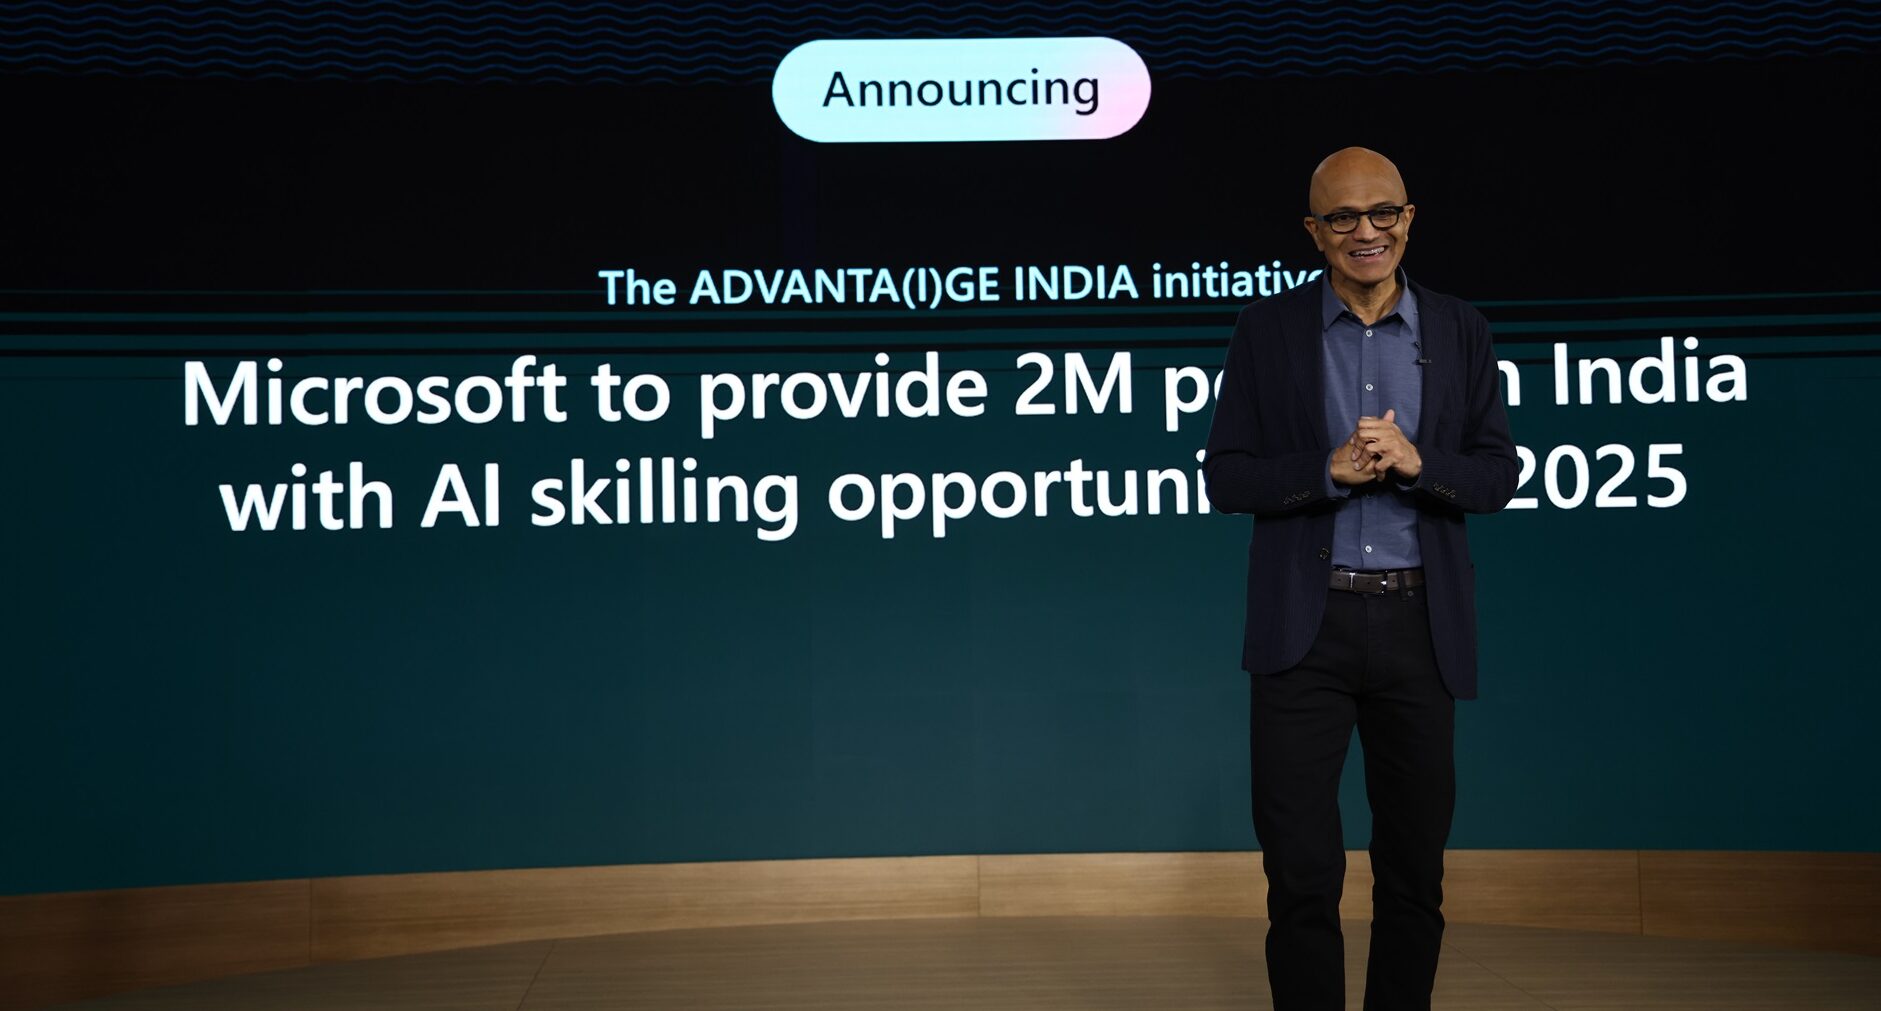 Microsoft unveils initiative to equip 2 million Indians with AI skills by 2025